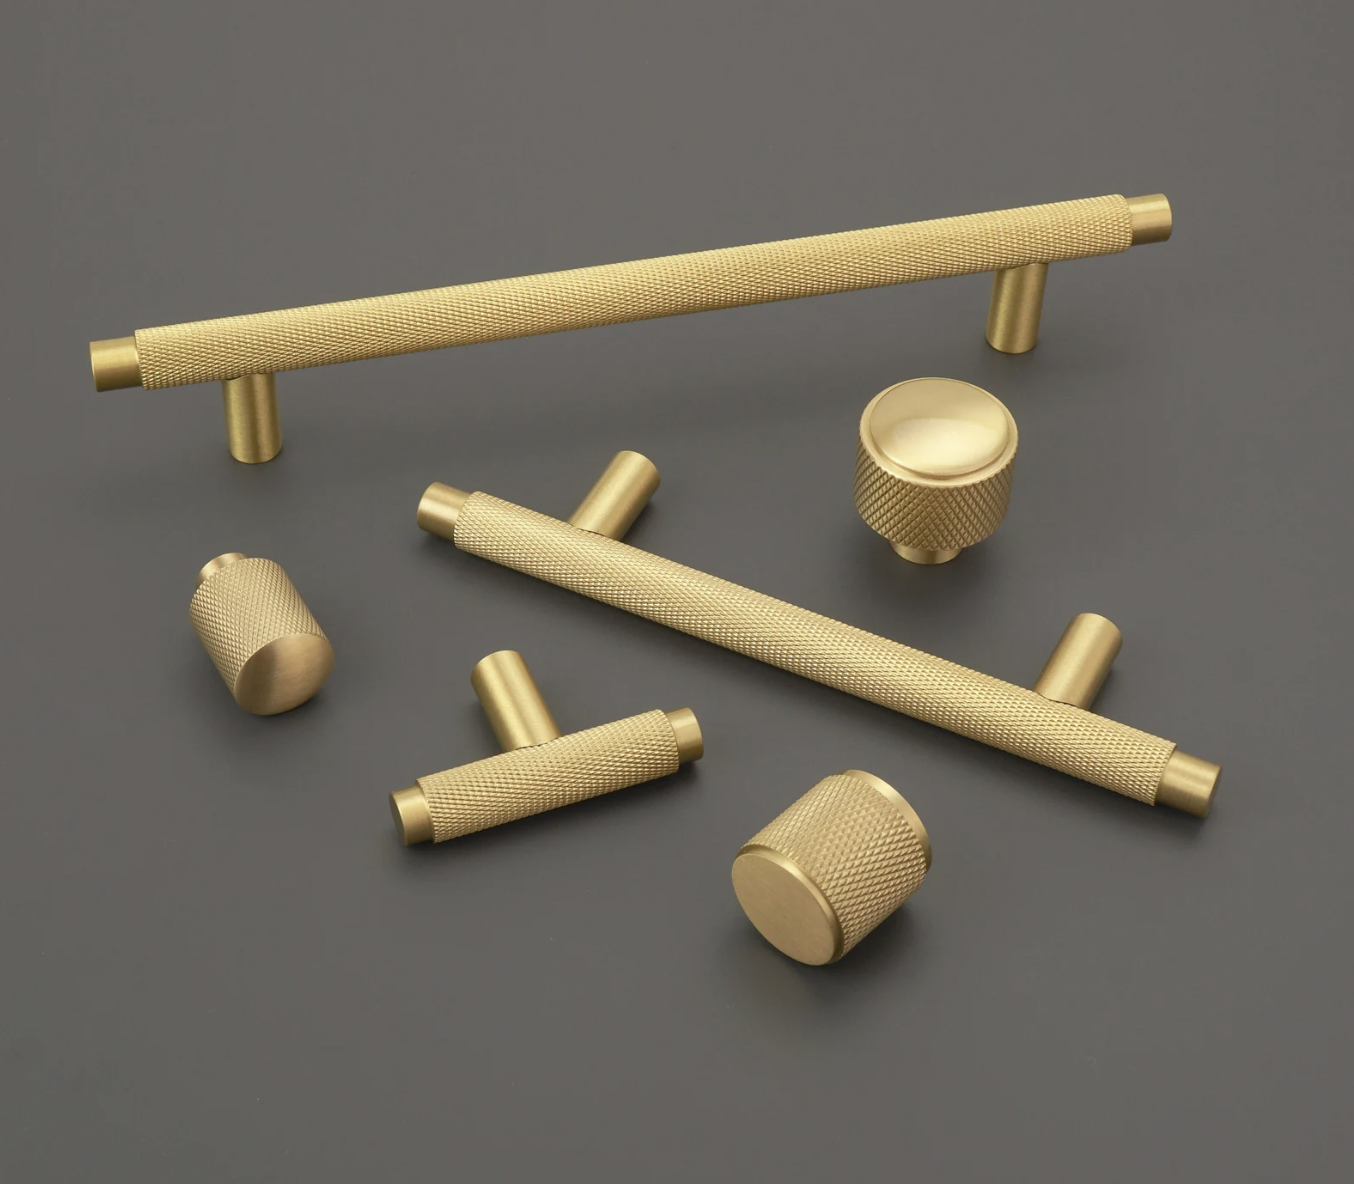 two knurled solid brass pulls and three knurled solid brass knobs on a gray surface